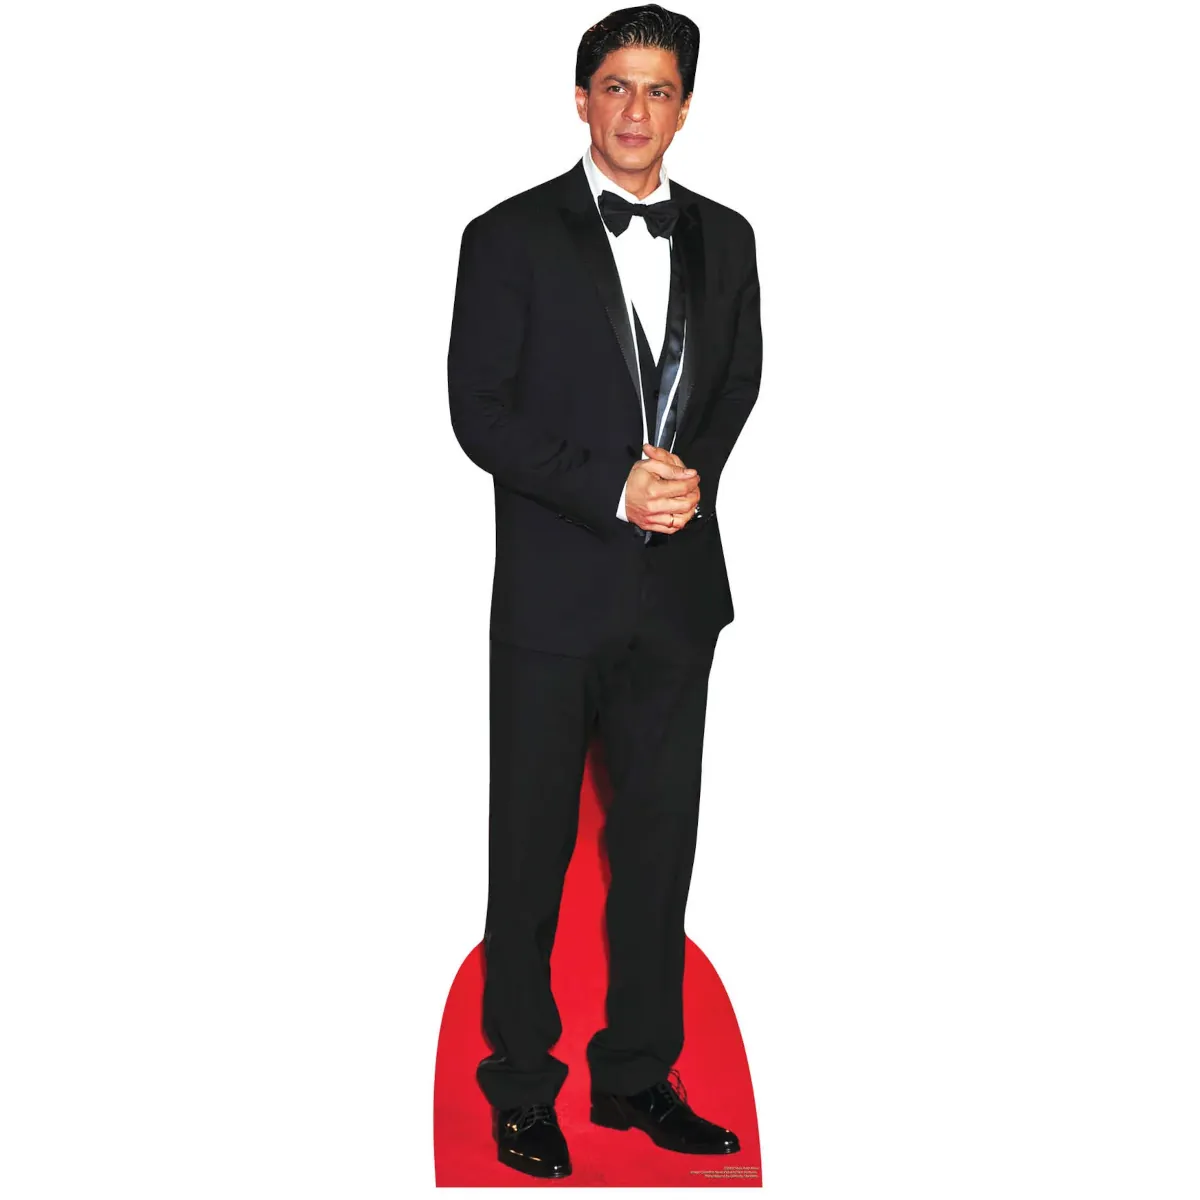 CS583 Shah Rukh Khan 'Black Suit' (Indian Actor) Lifesize Cardboard Cutout Standee Front